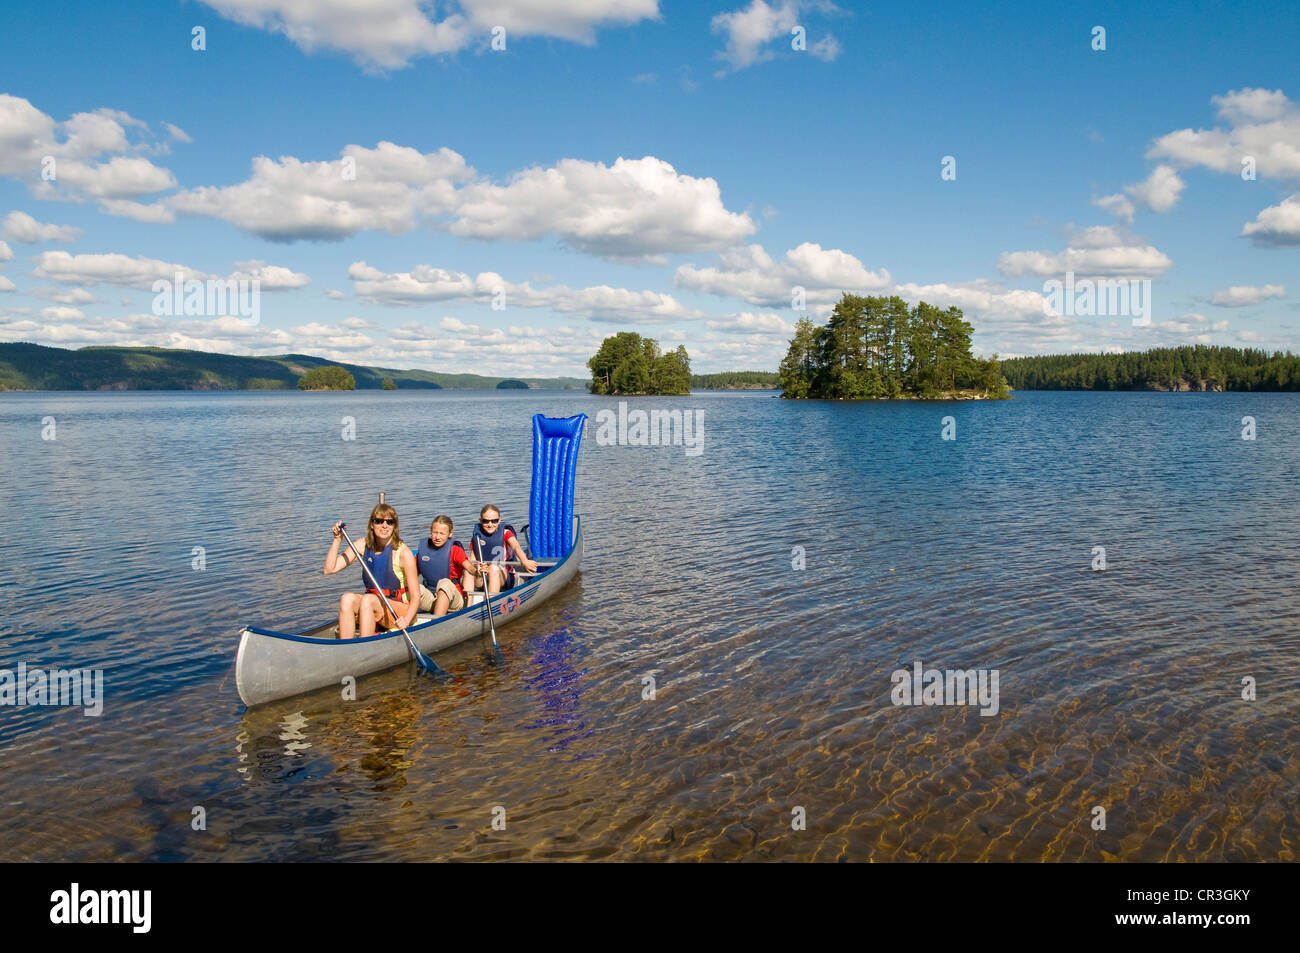 Family canoeing on a lake near Bengtsfors, Dalsland, Sweden, Europe Stock Photo